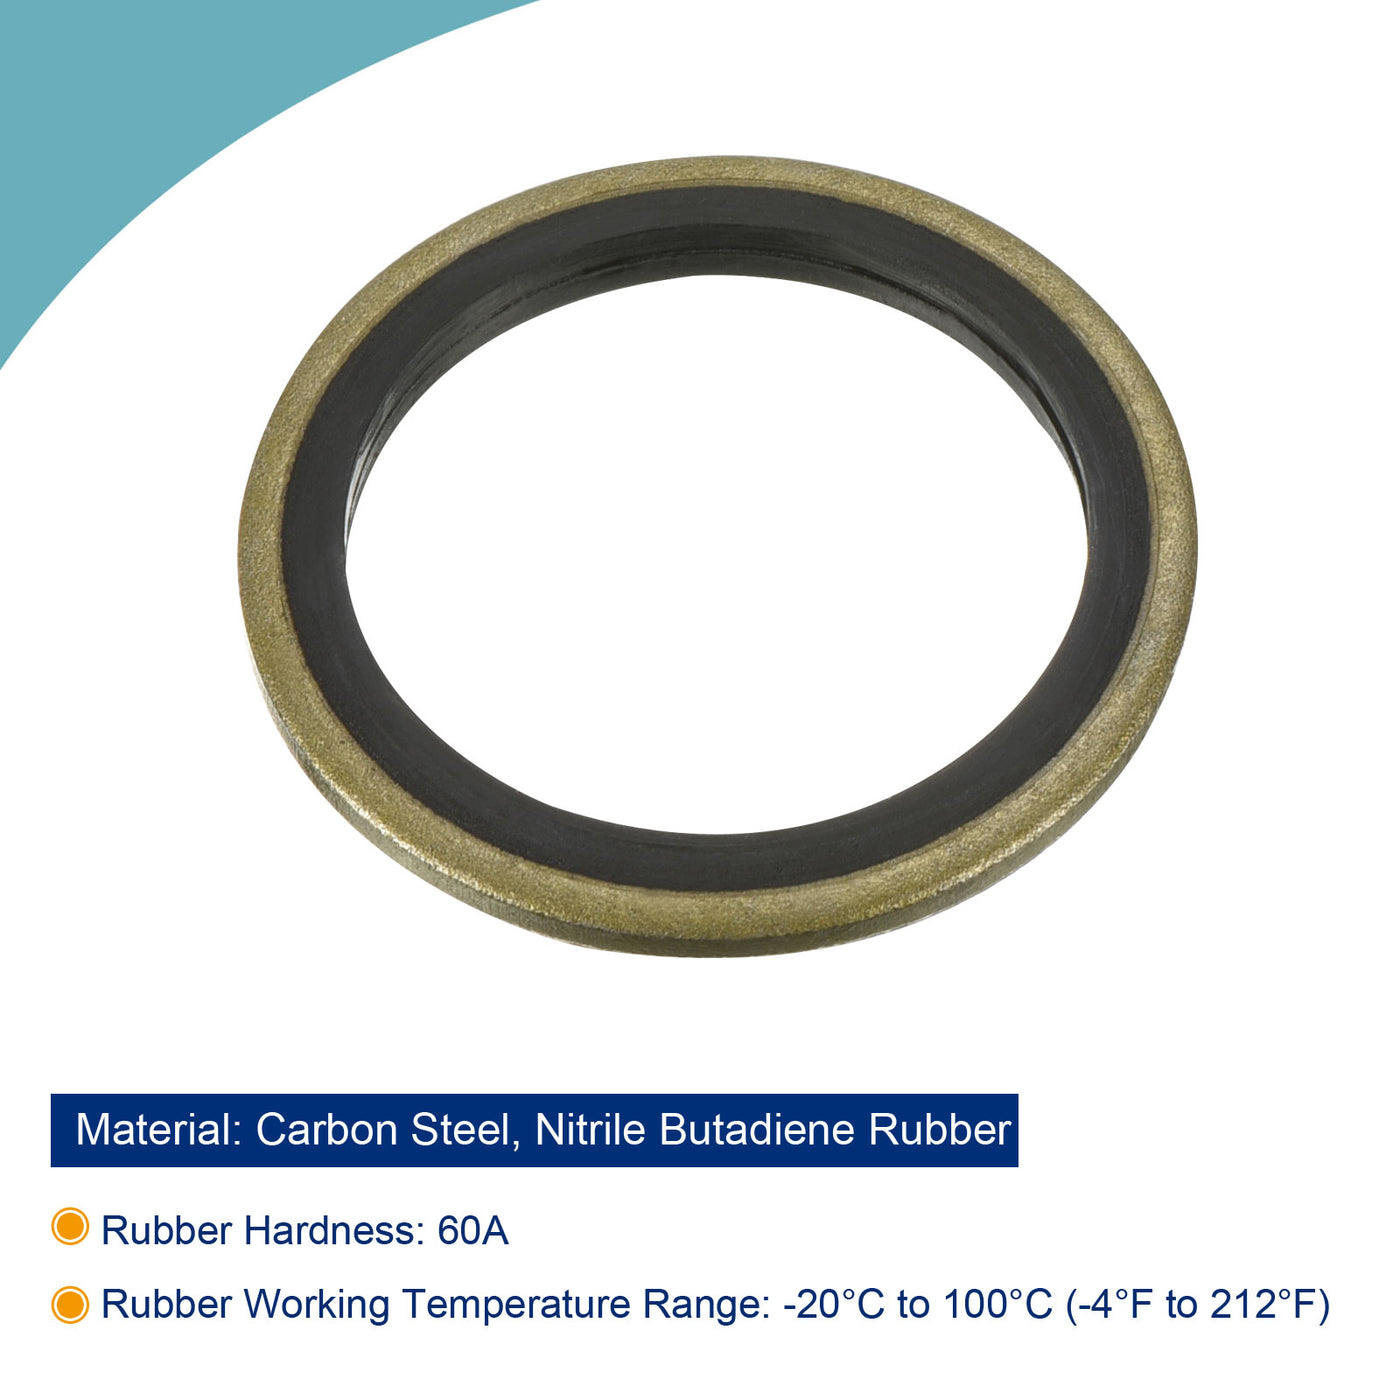 Harfington Bonded Sealing Washers M24 31.5x24x2mm Carbon Steel Nitrile Rubber Gasket, Pack of 5